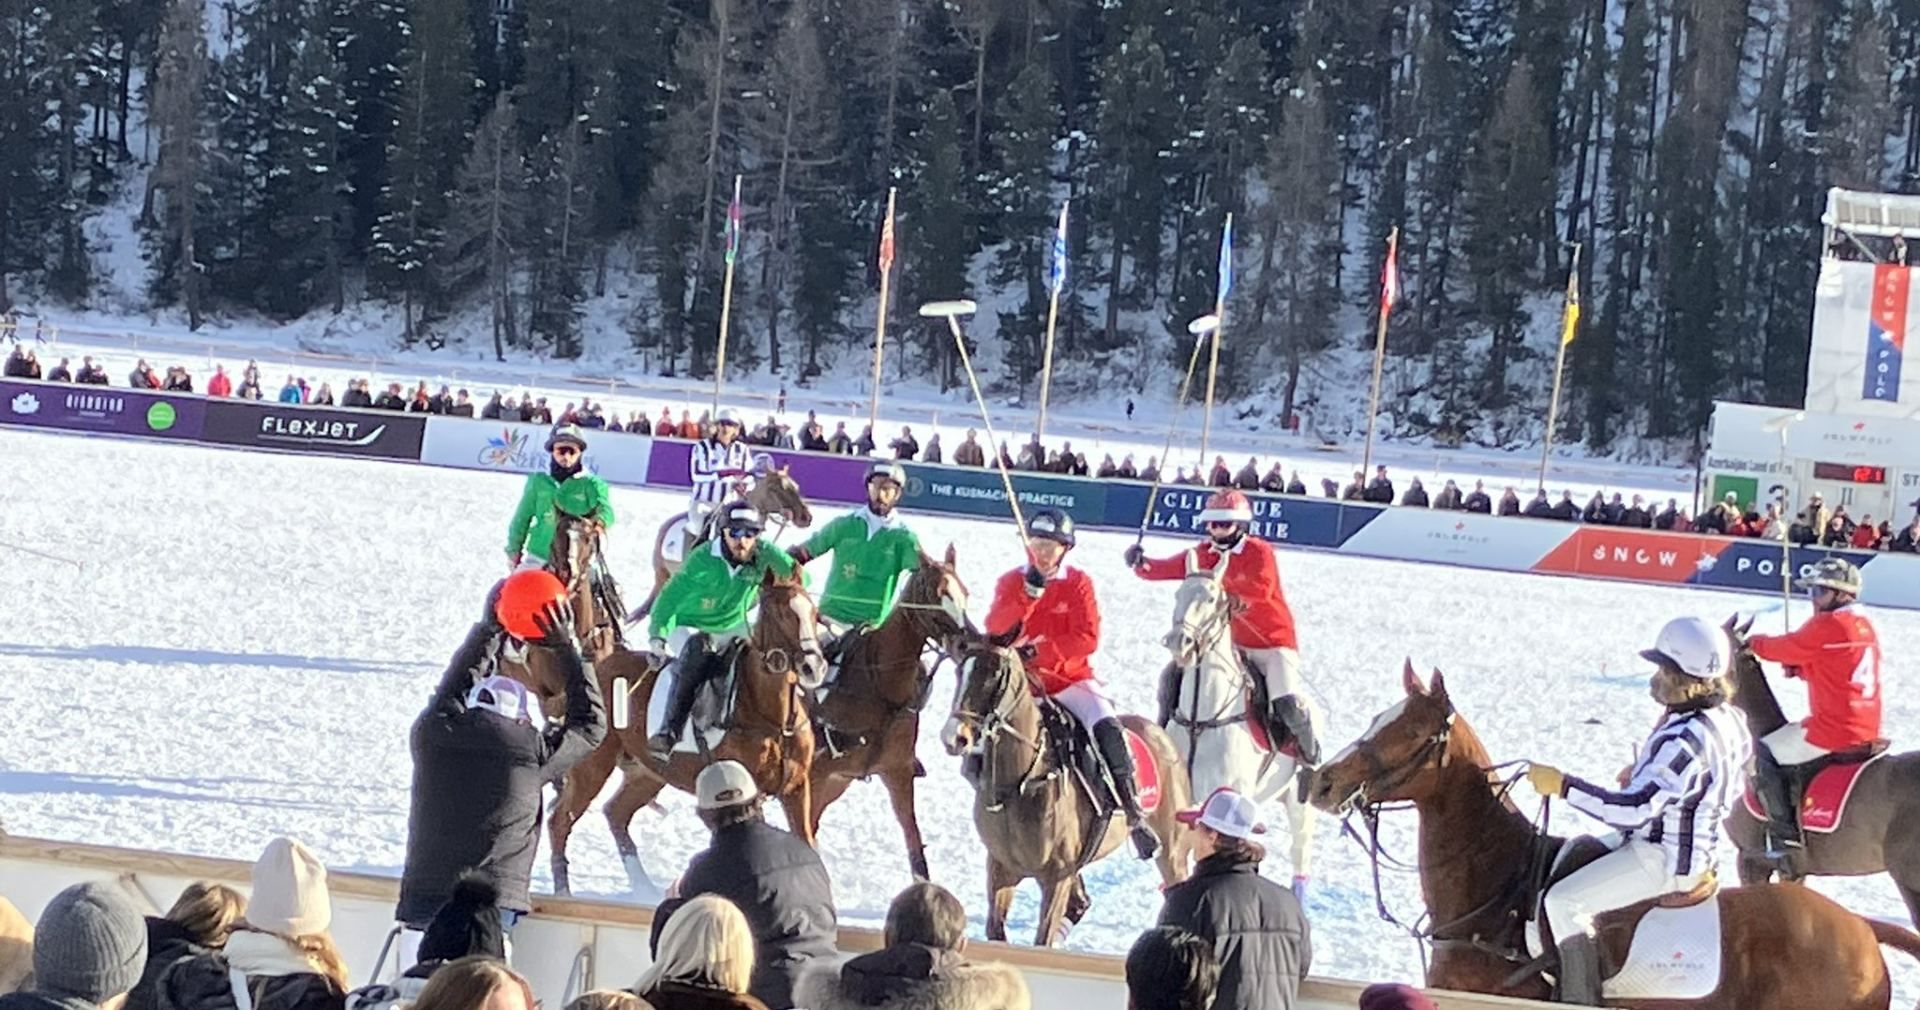 National team crowned champion at Snow Polo World Cup St. Moritz [PHOTO]